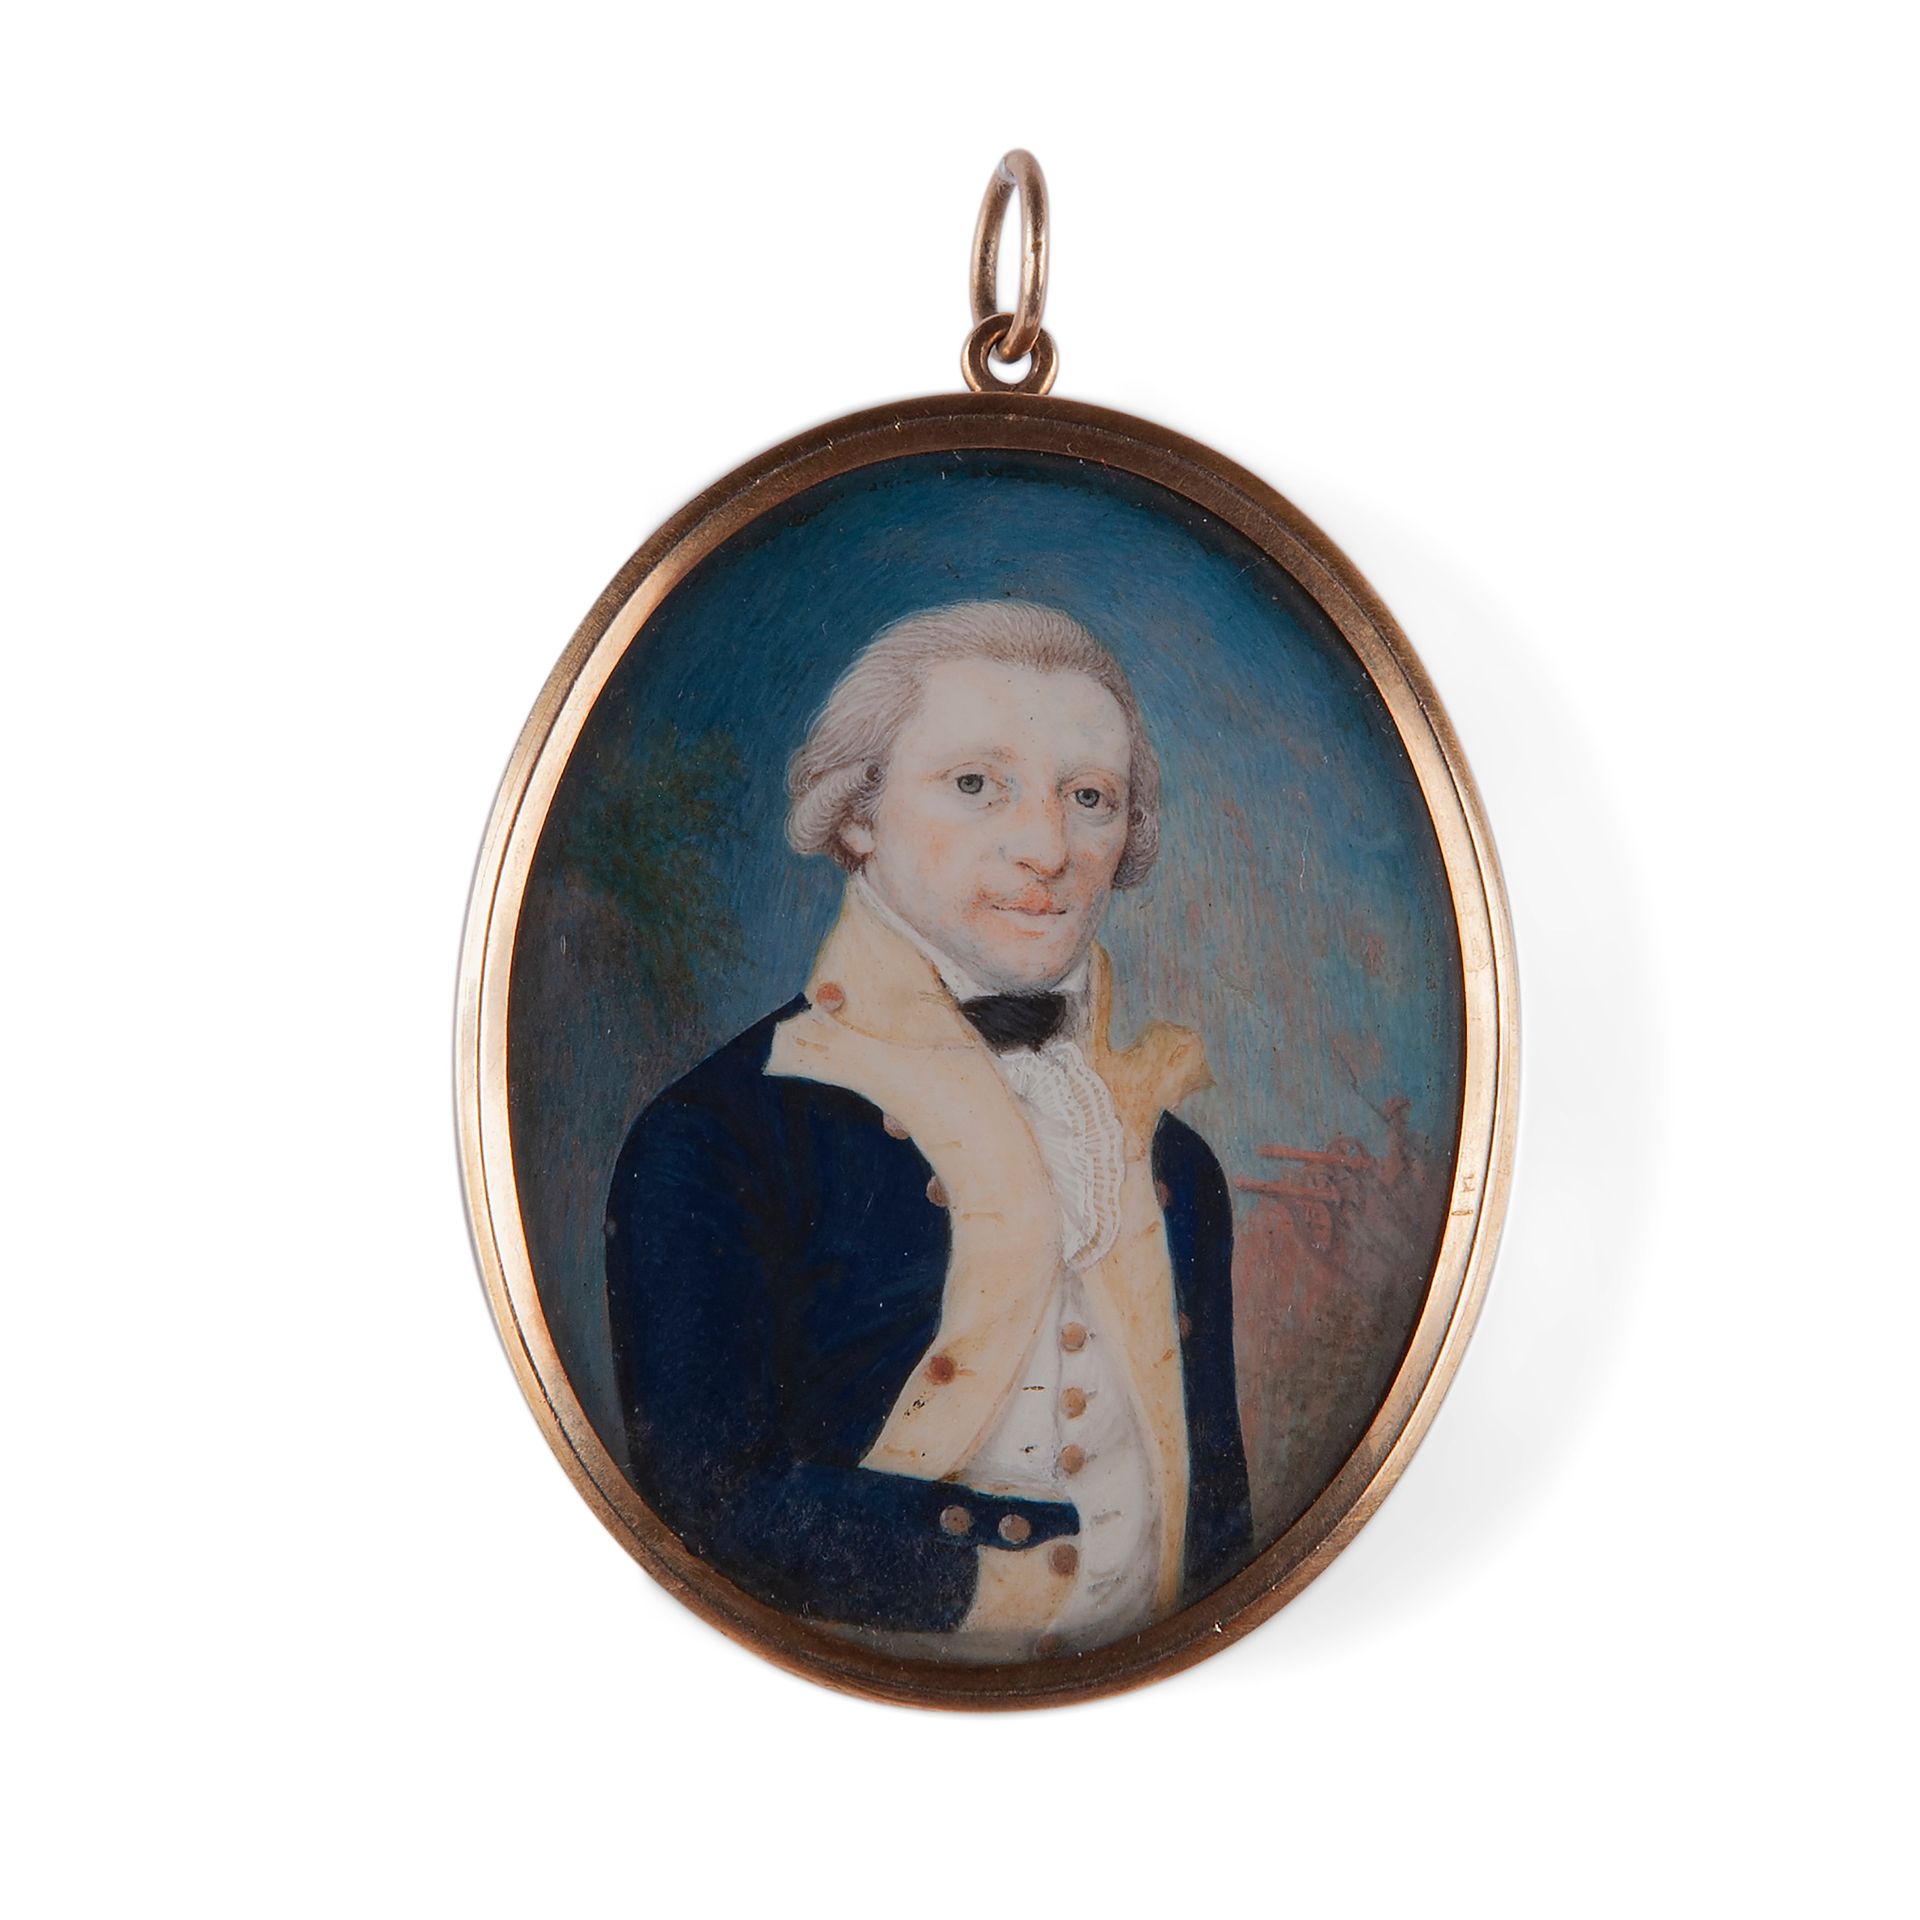 Miniature portrait of an official, England late 18th century 官员的微型画像，英国，18世纪末 背景&hellip;